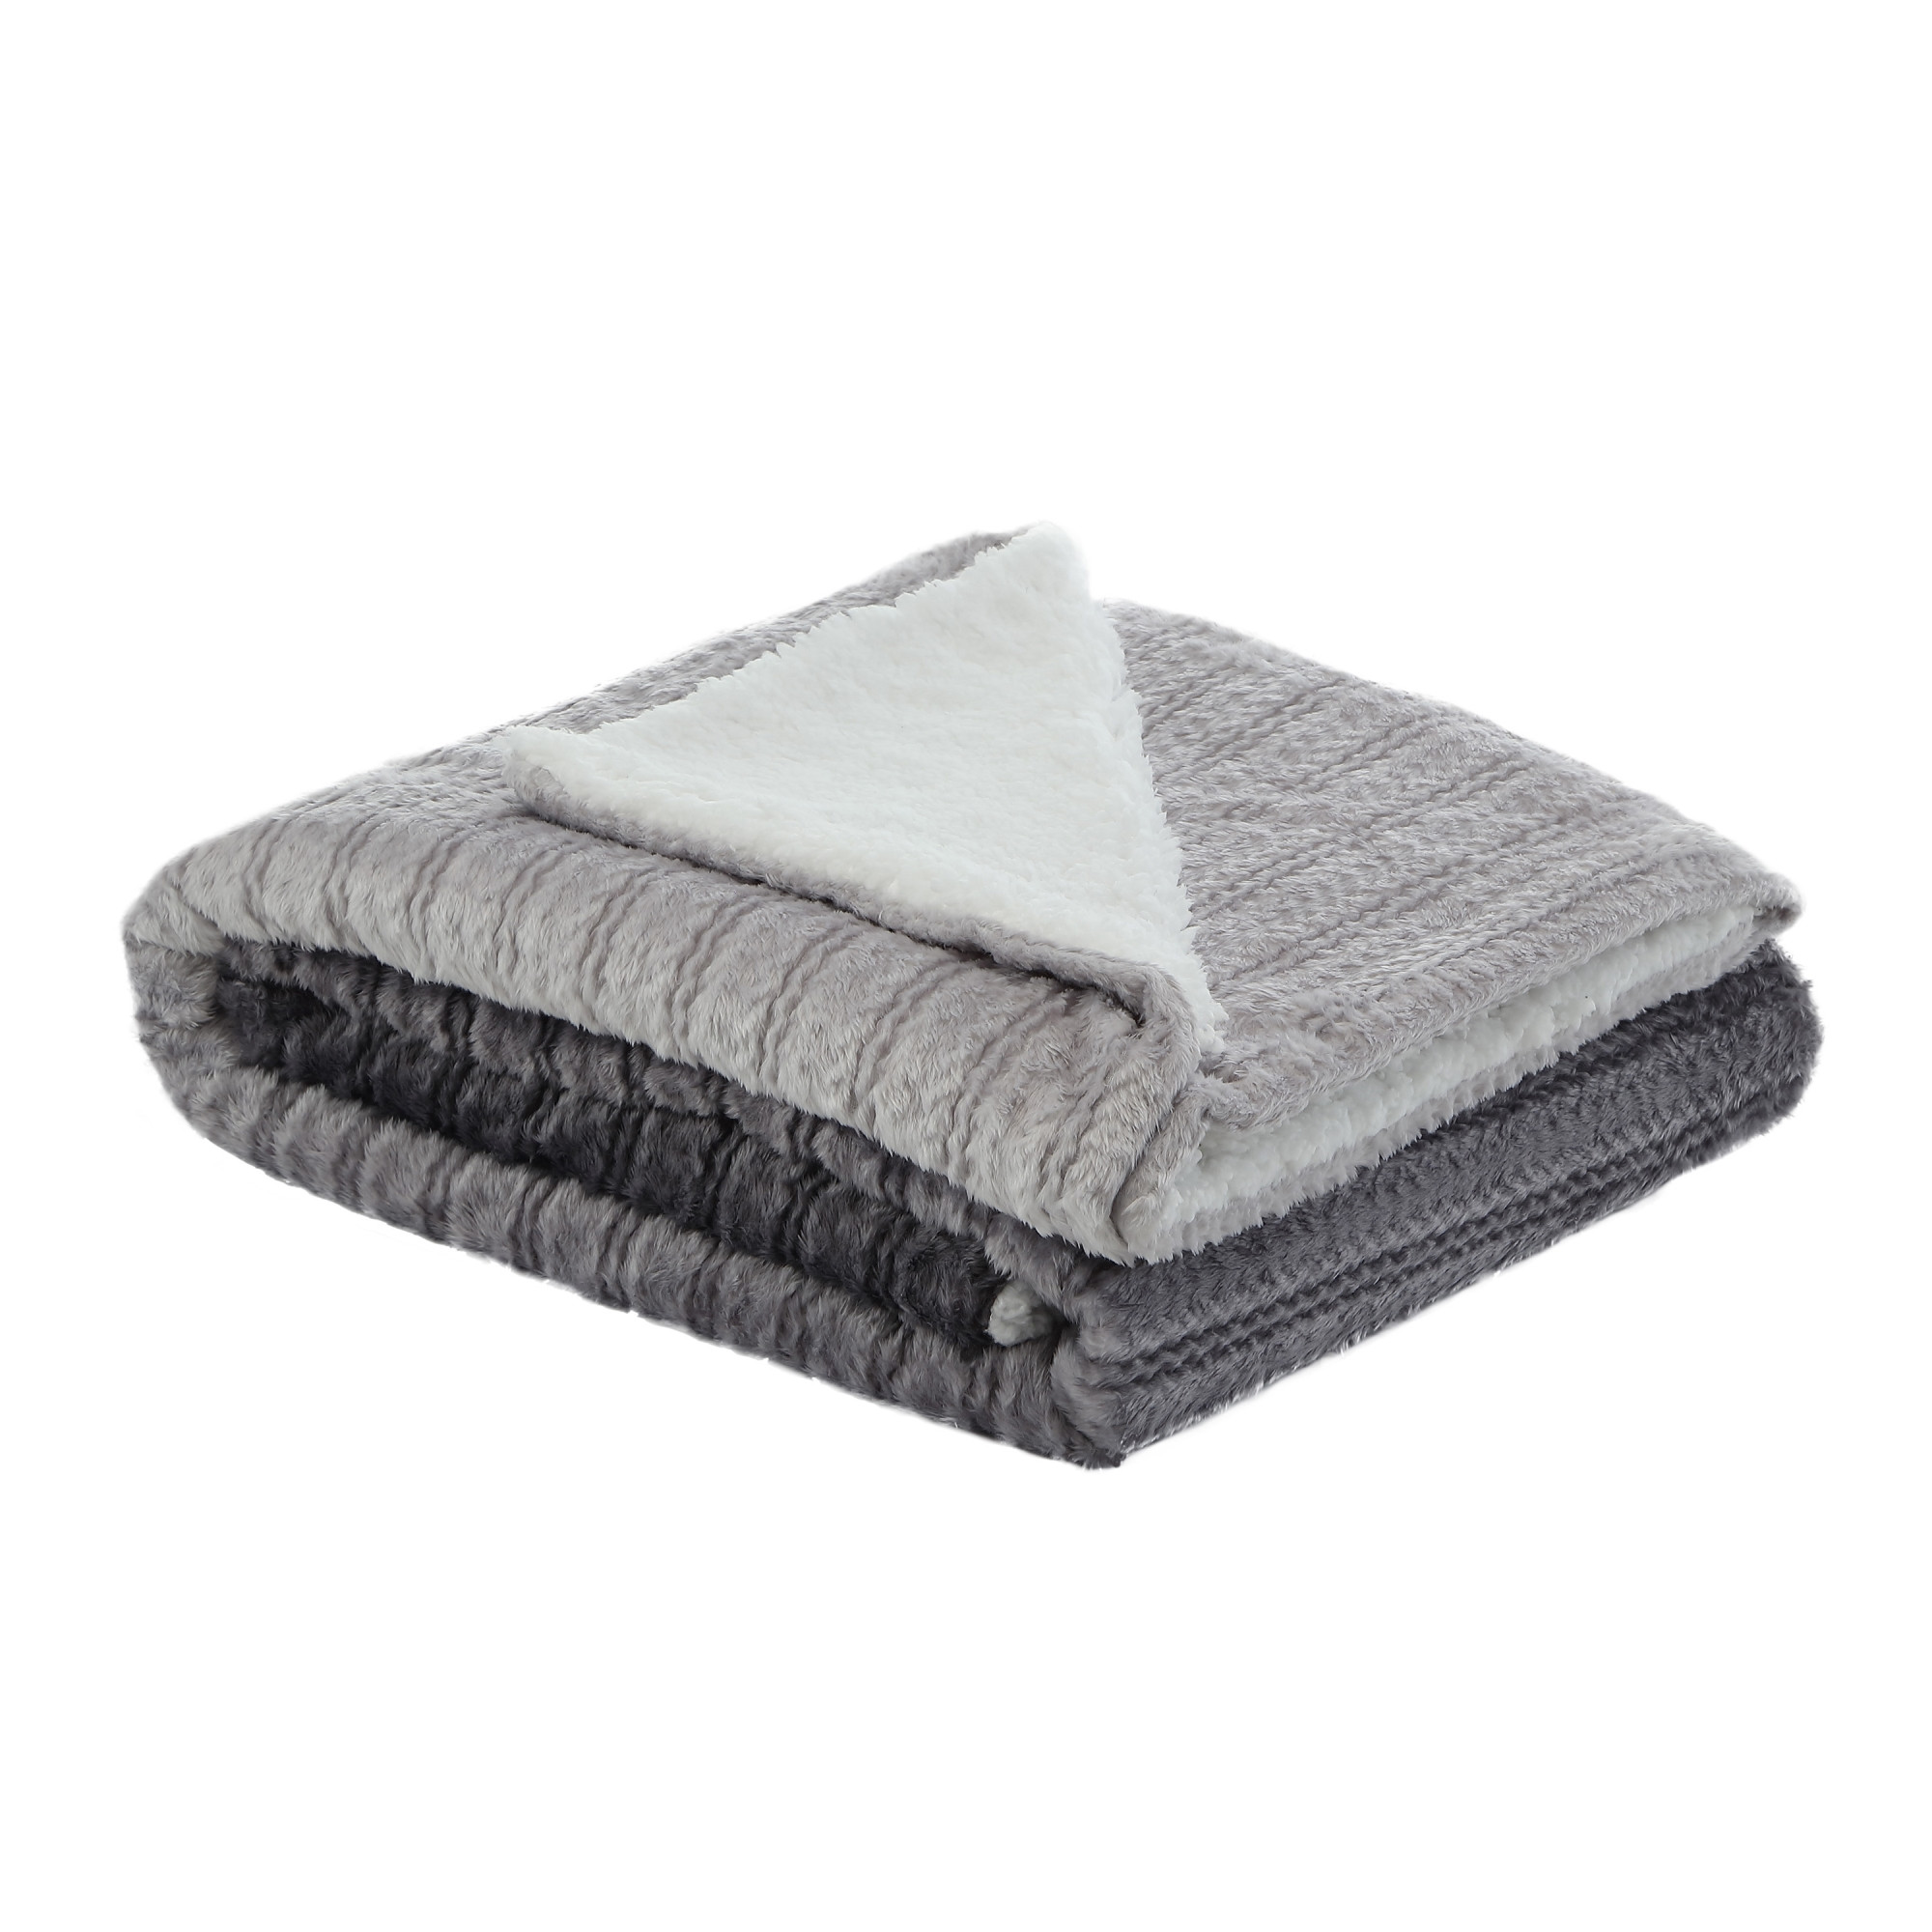 Dark Slate Gray Knitted PolYester Solid Color Plush Throw Blanket-531229-1